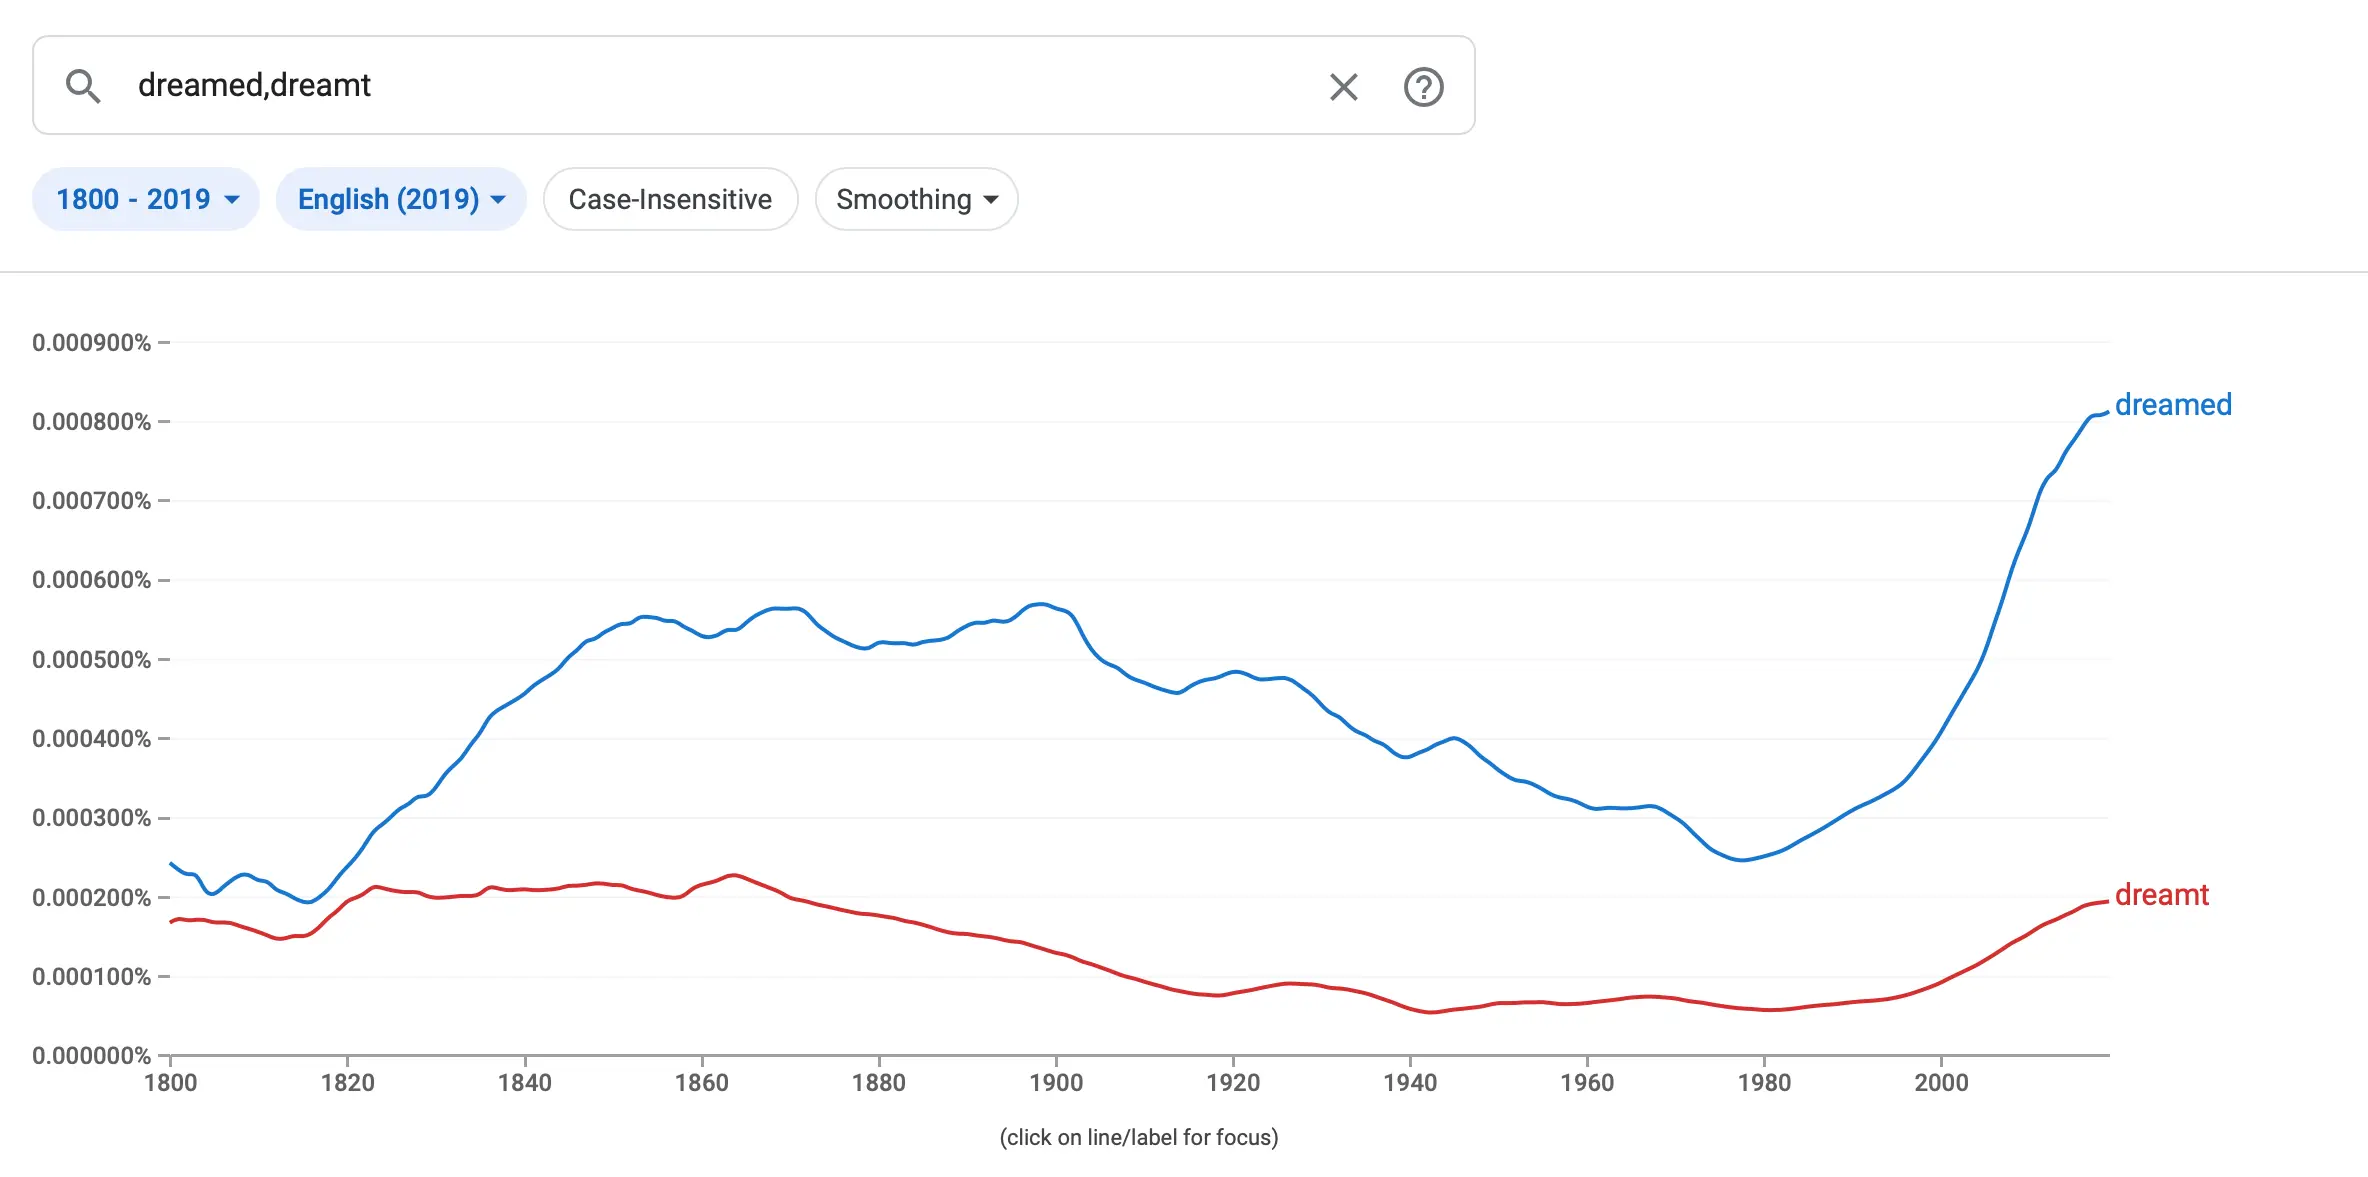 Google's Ngram showing the usage of dreamed vs. dreamt